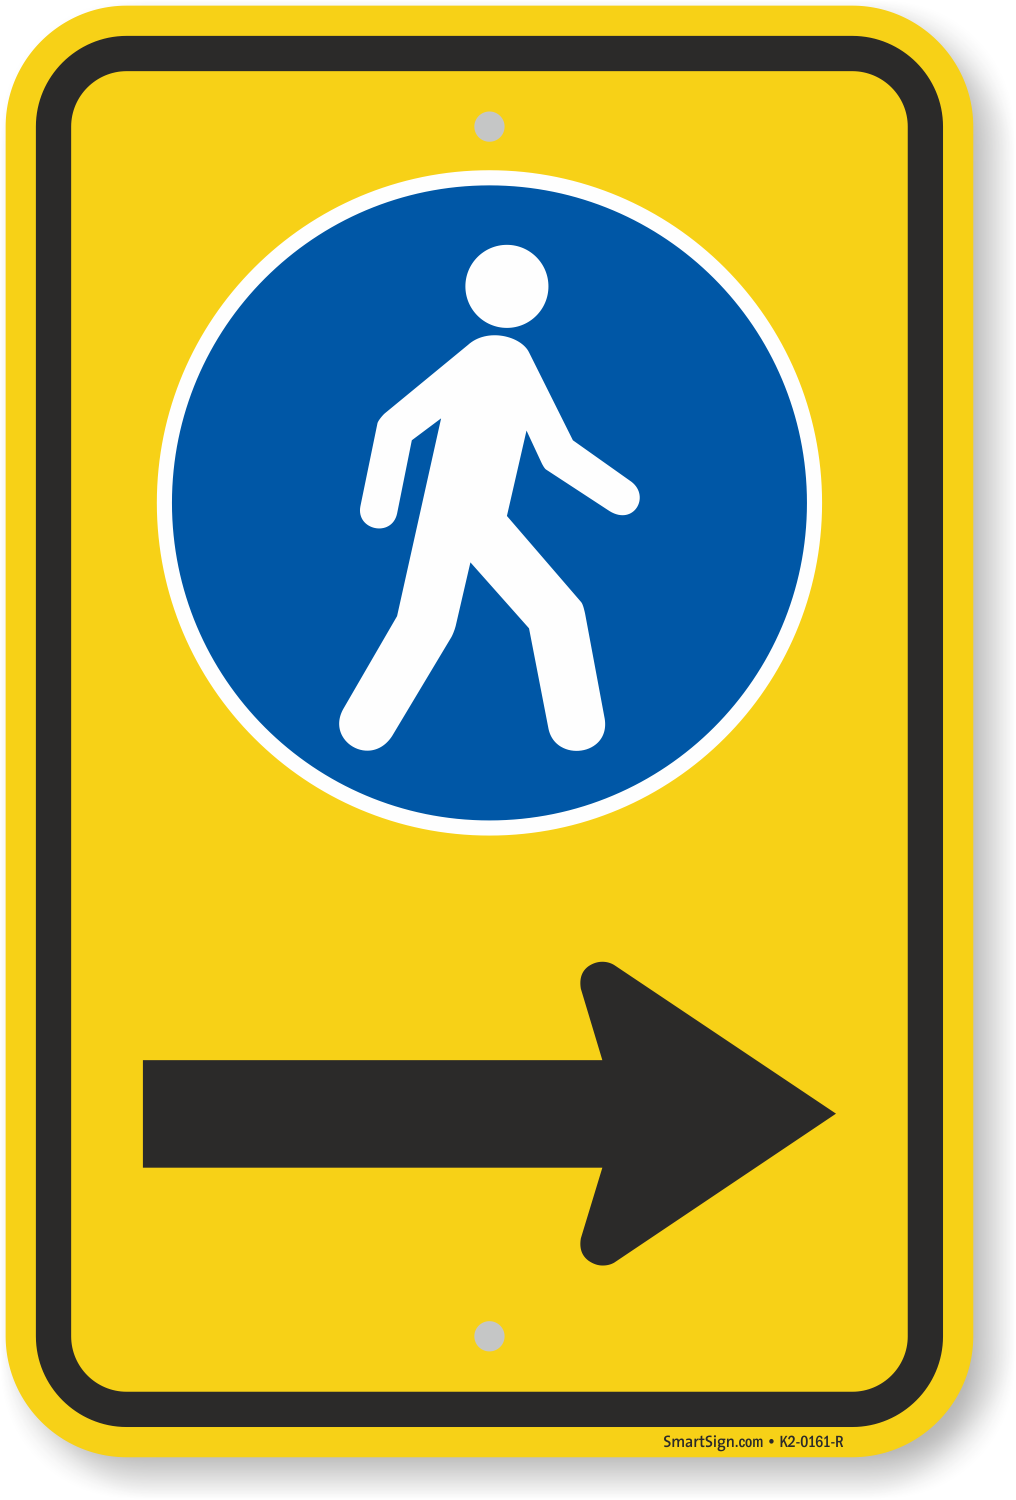 Pedestrians right directional arrow Safety sign 